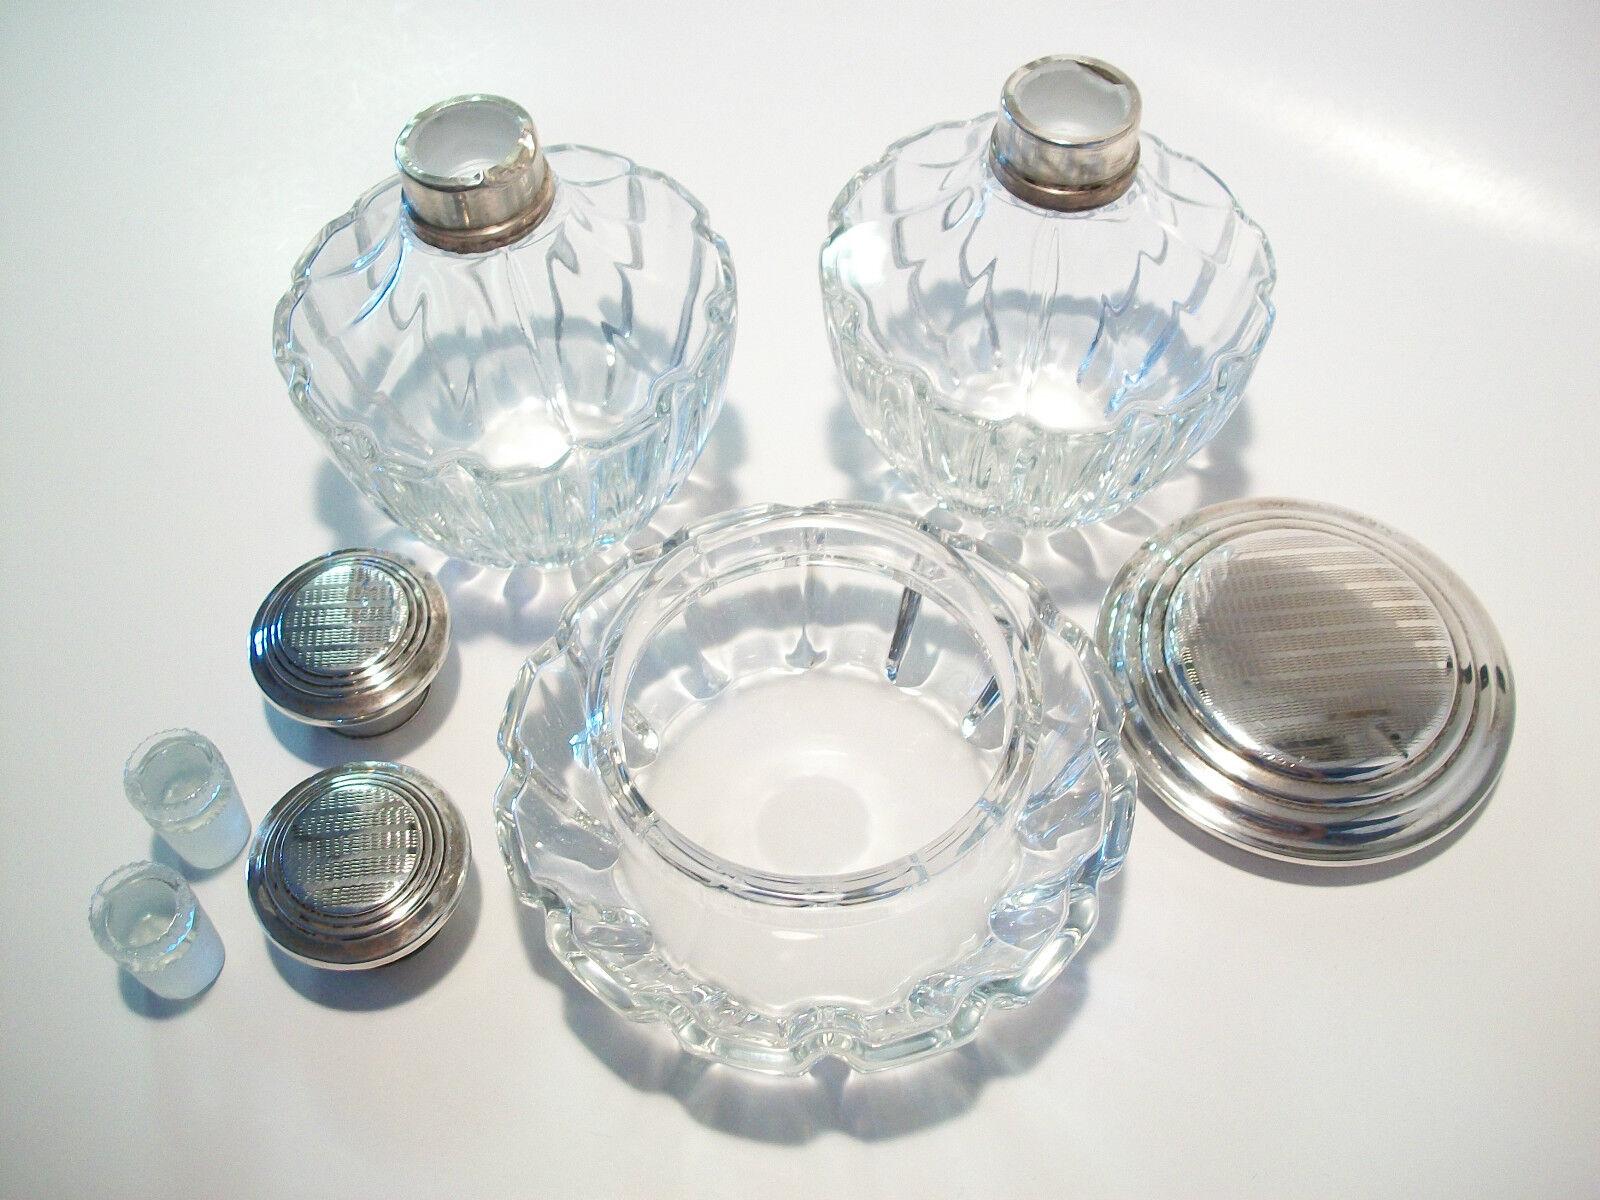 Vintage Three Piece Vanity Set - Silver Plate & Crystal - Early 20th Century For Sale 4